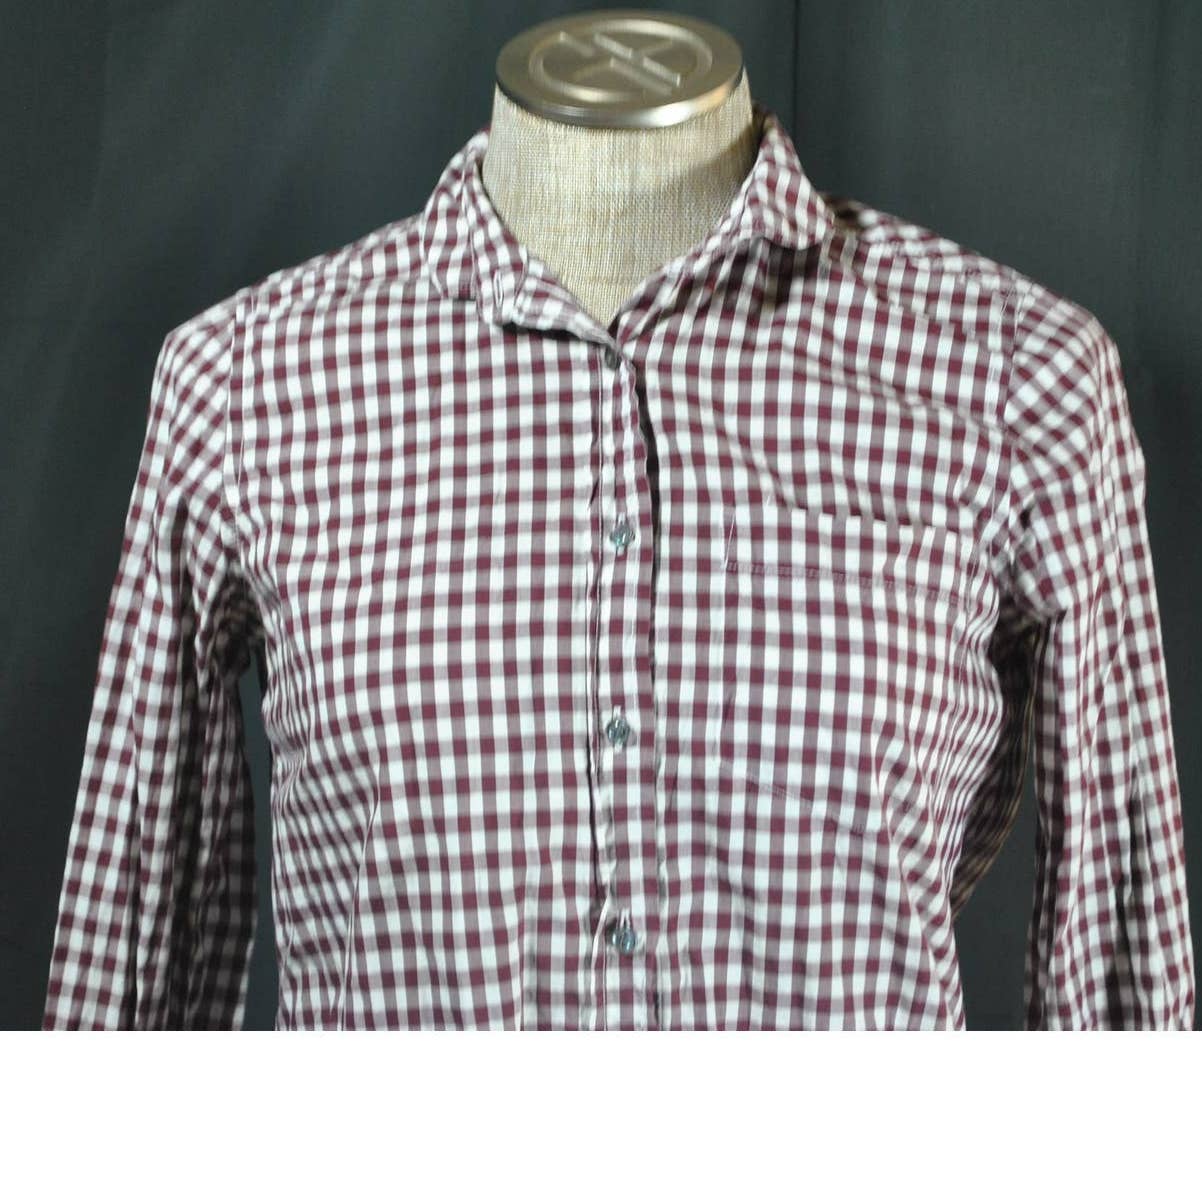 J.Crew Brown White Gingham Button Up Top - 2